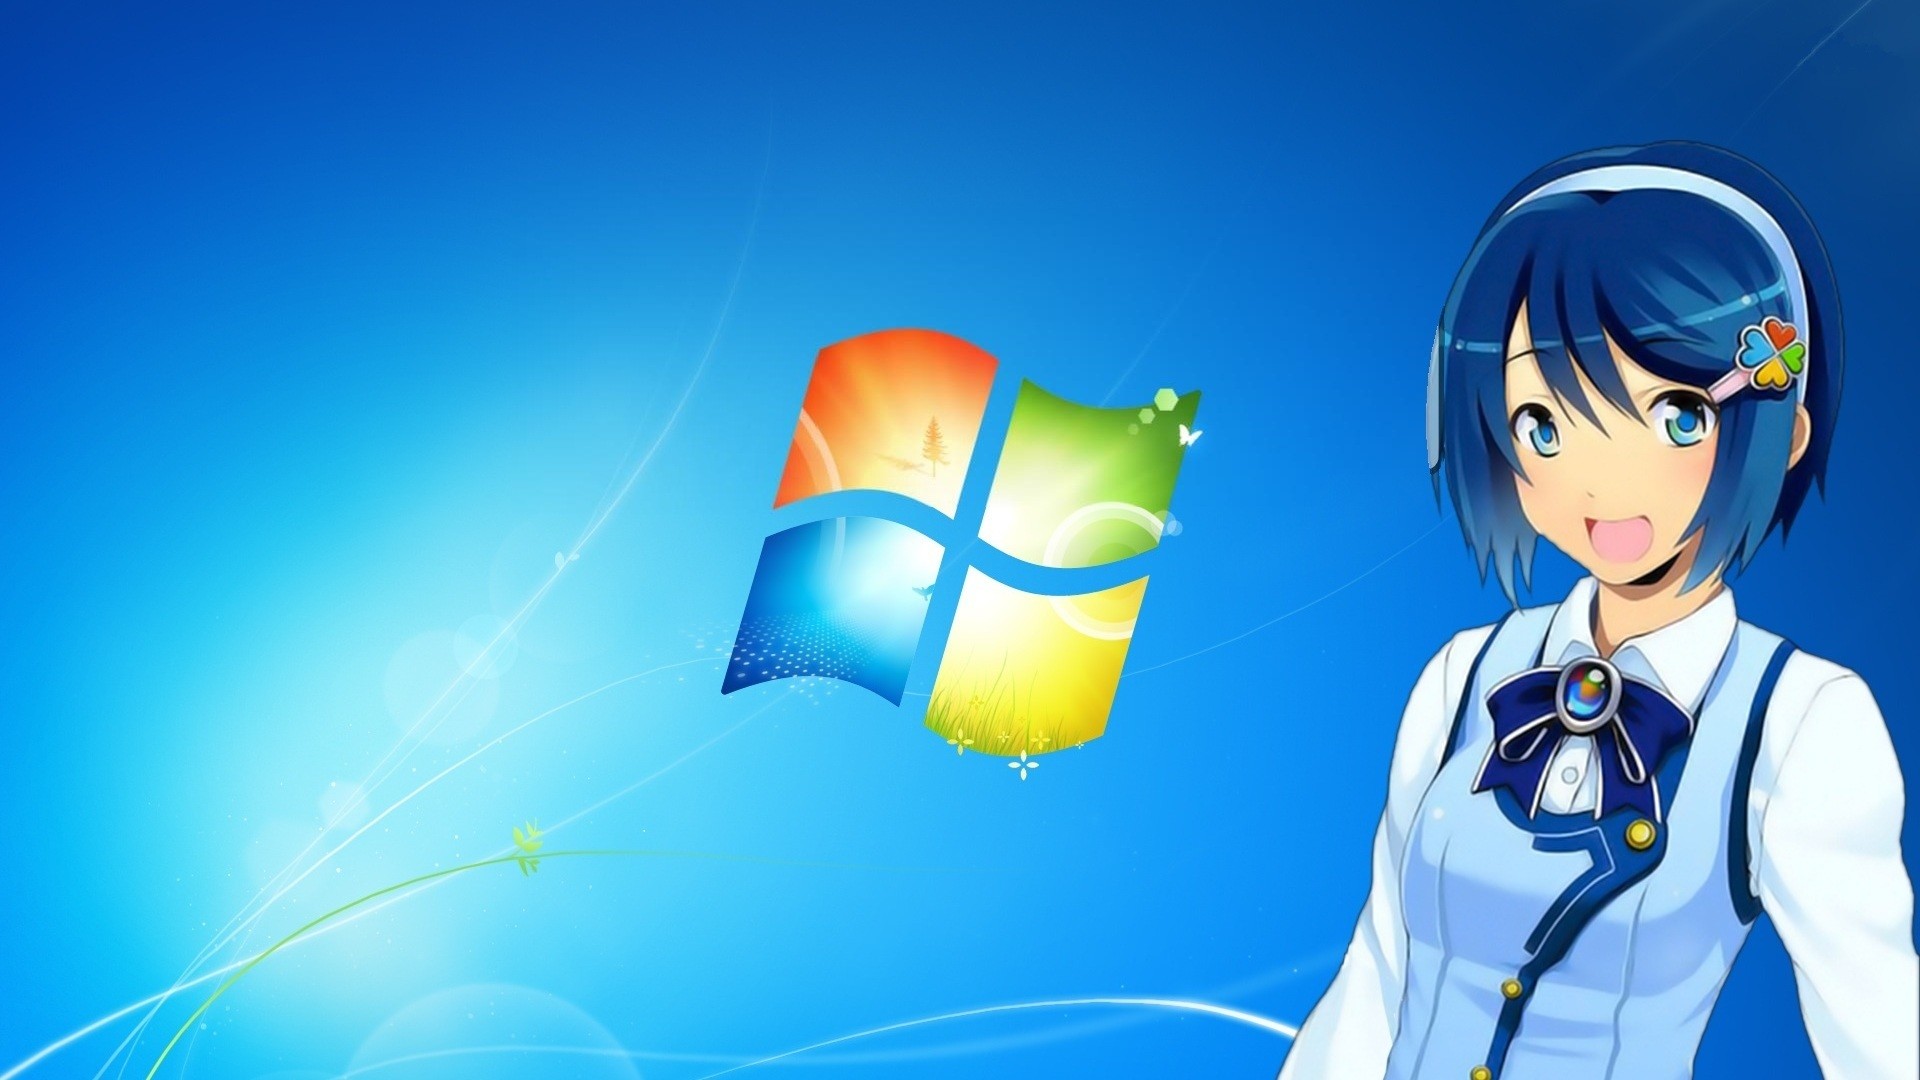 1920x1080 Anime Wallpapers For PC Wallpapers) – HD Wallpapers